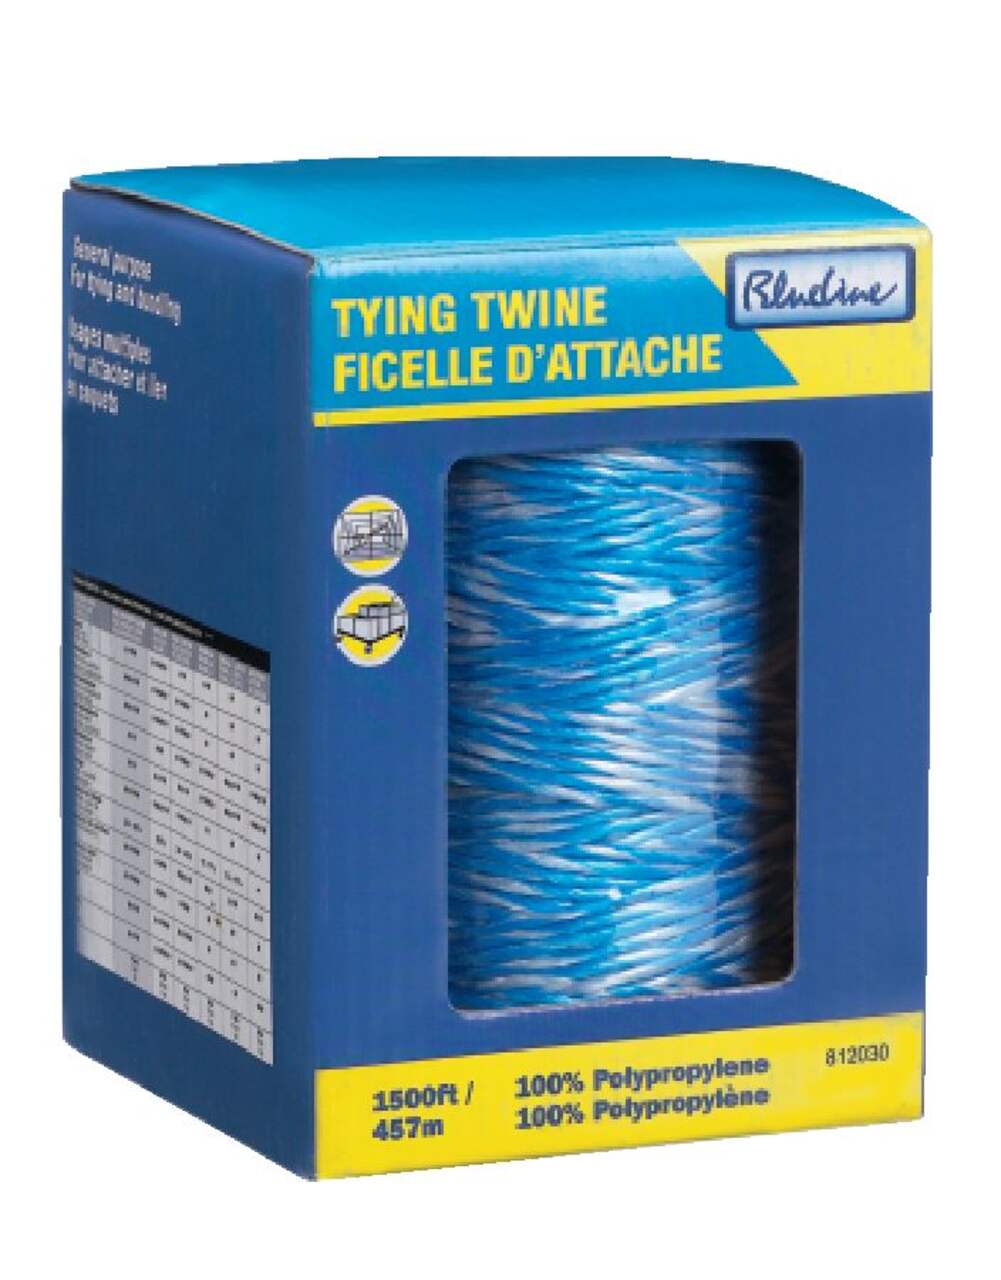 KingCord Cotton Household Twine, Extra Strong, 450-ft